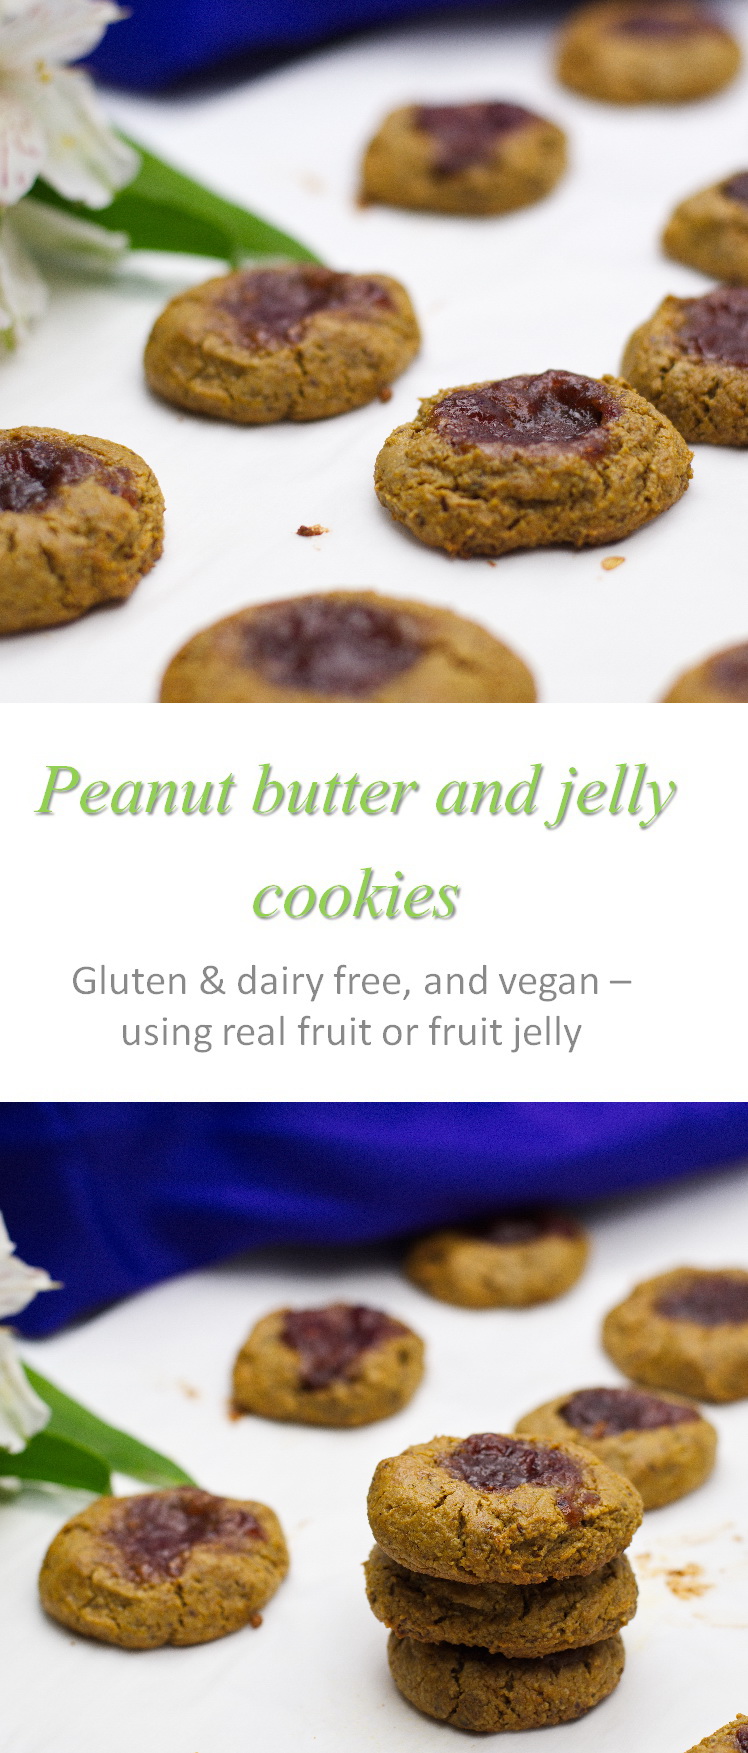 Grain-free, sugar-free, egg-free, gluten-free, oil-free but still packed with flavour, these vegan peanut butter & jelly cookies are sure to be enjoyed! #pbandj